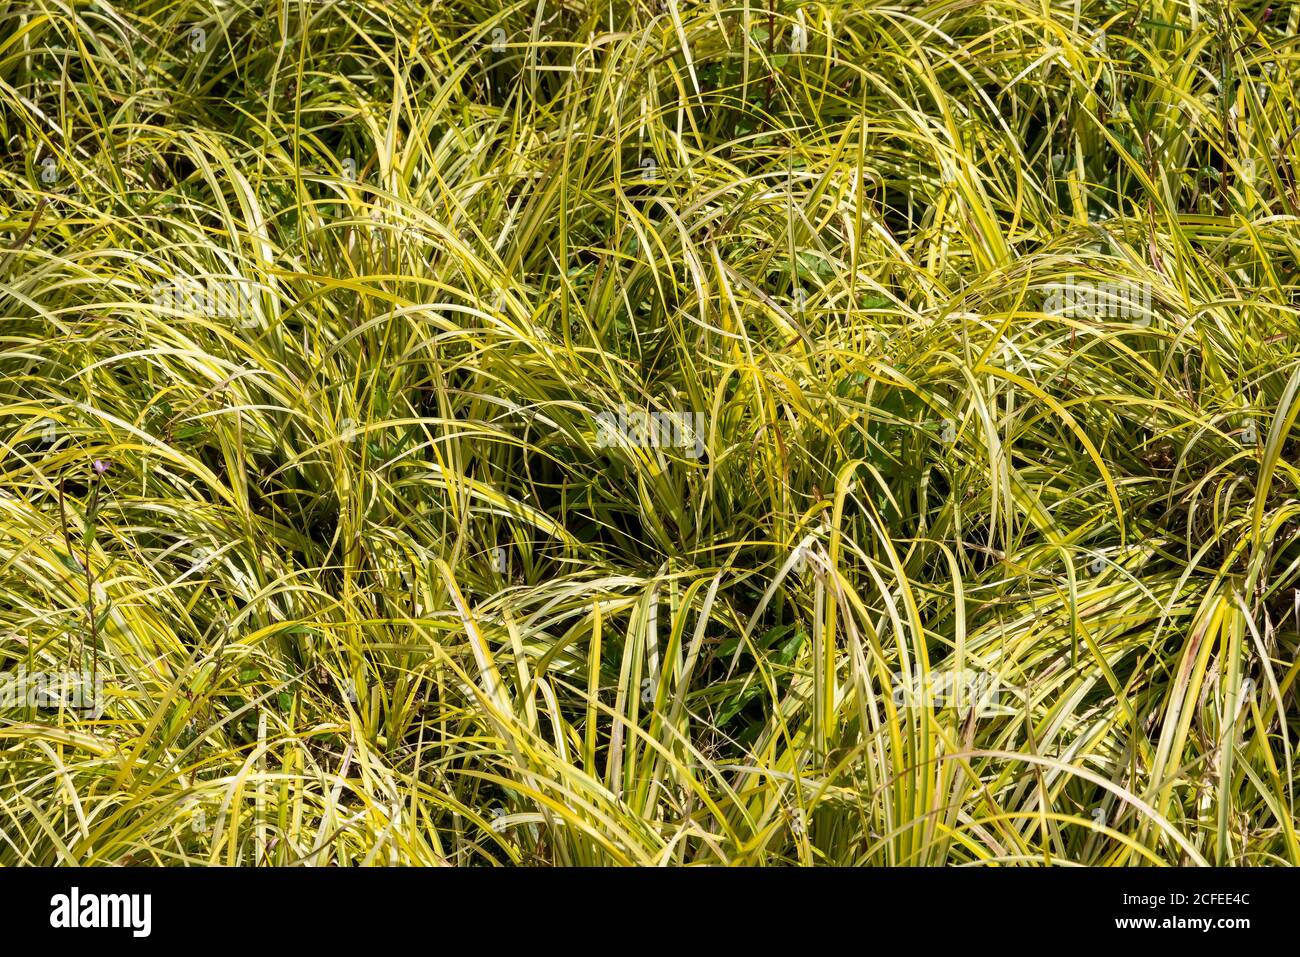 Acorus gramineus 'Oron' an evergreen plant commonly known as Japanese sweet flag or Golden Japanes Rush stock photo image Stock Photo